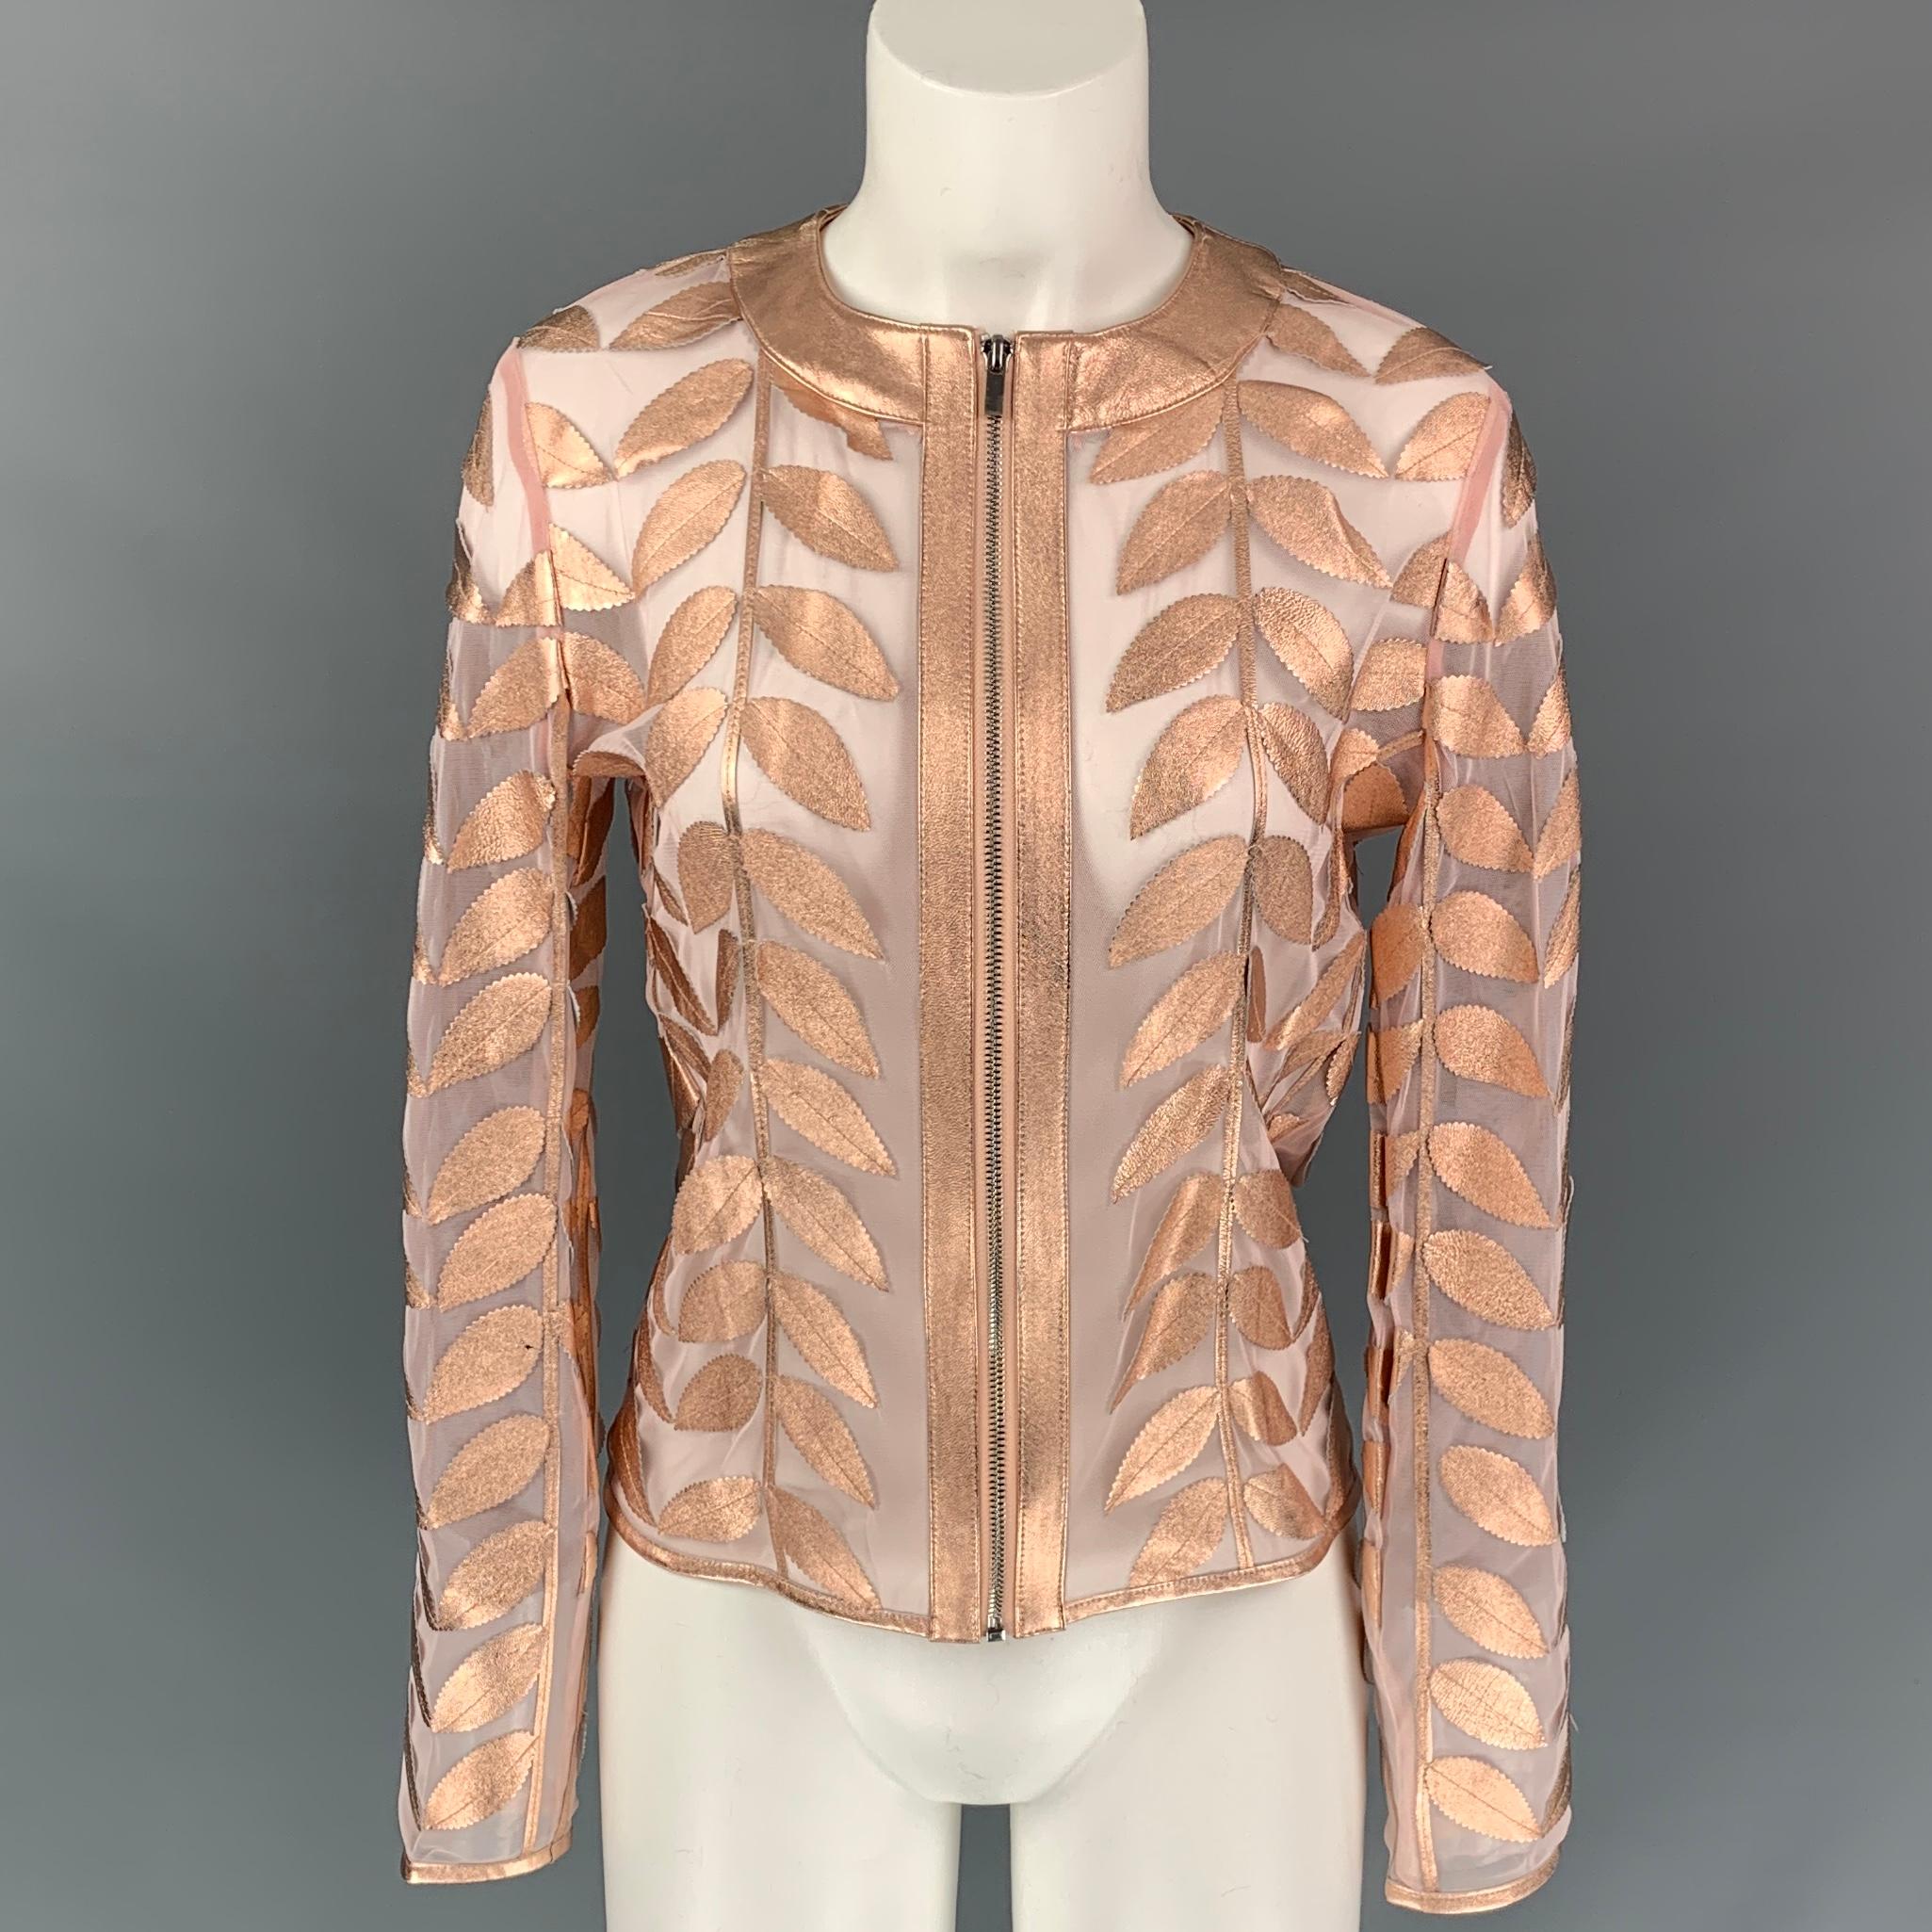 NEIMAN MARCUS The Leather Collection Size XS Rose Gold Leather Jacket